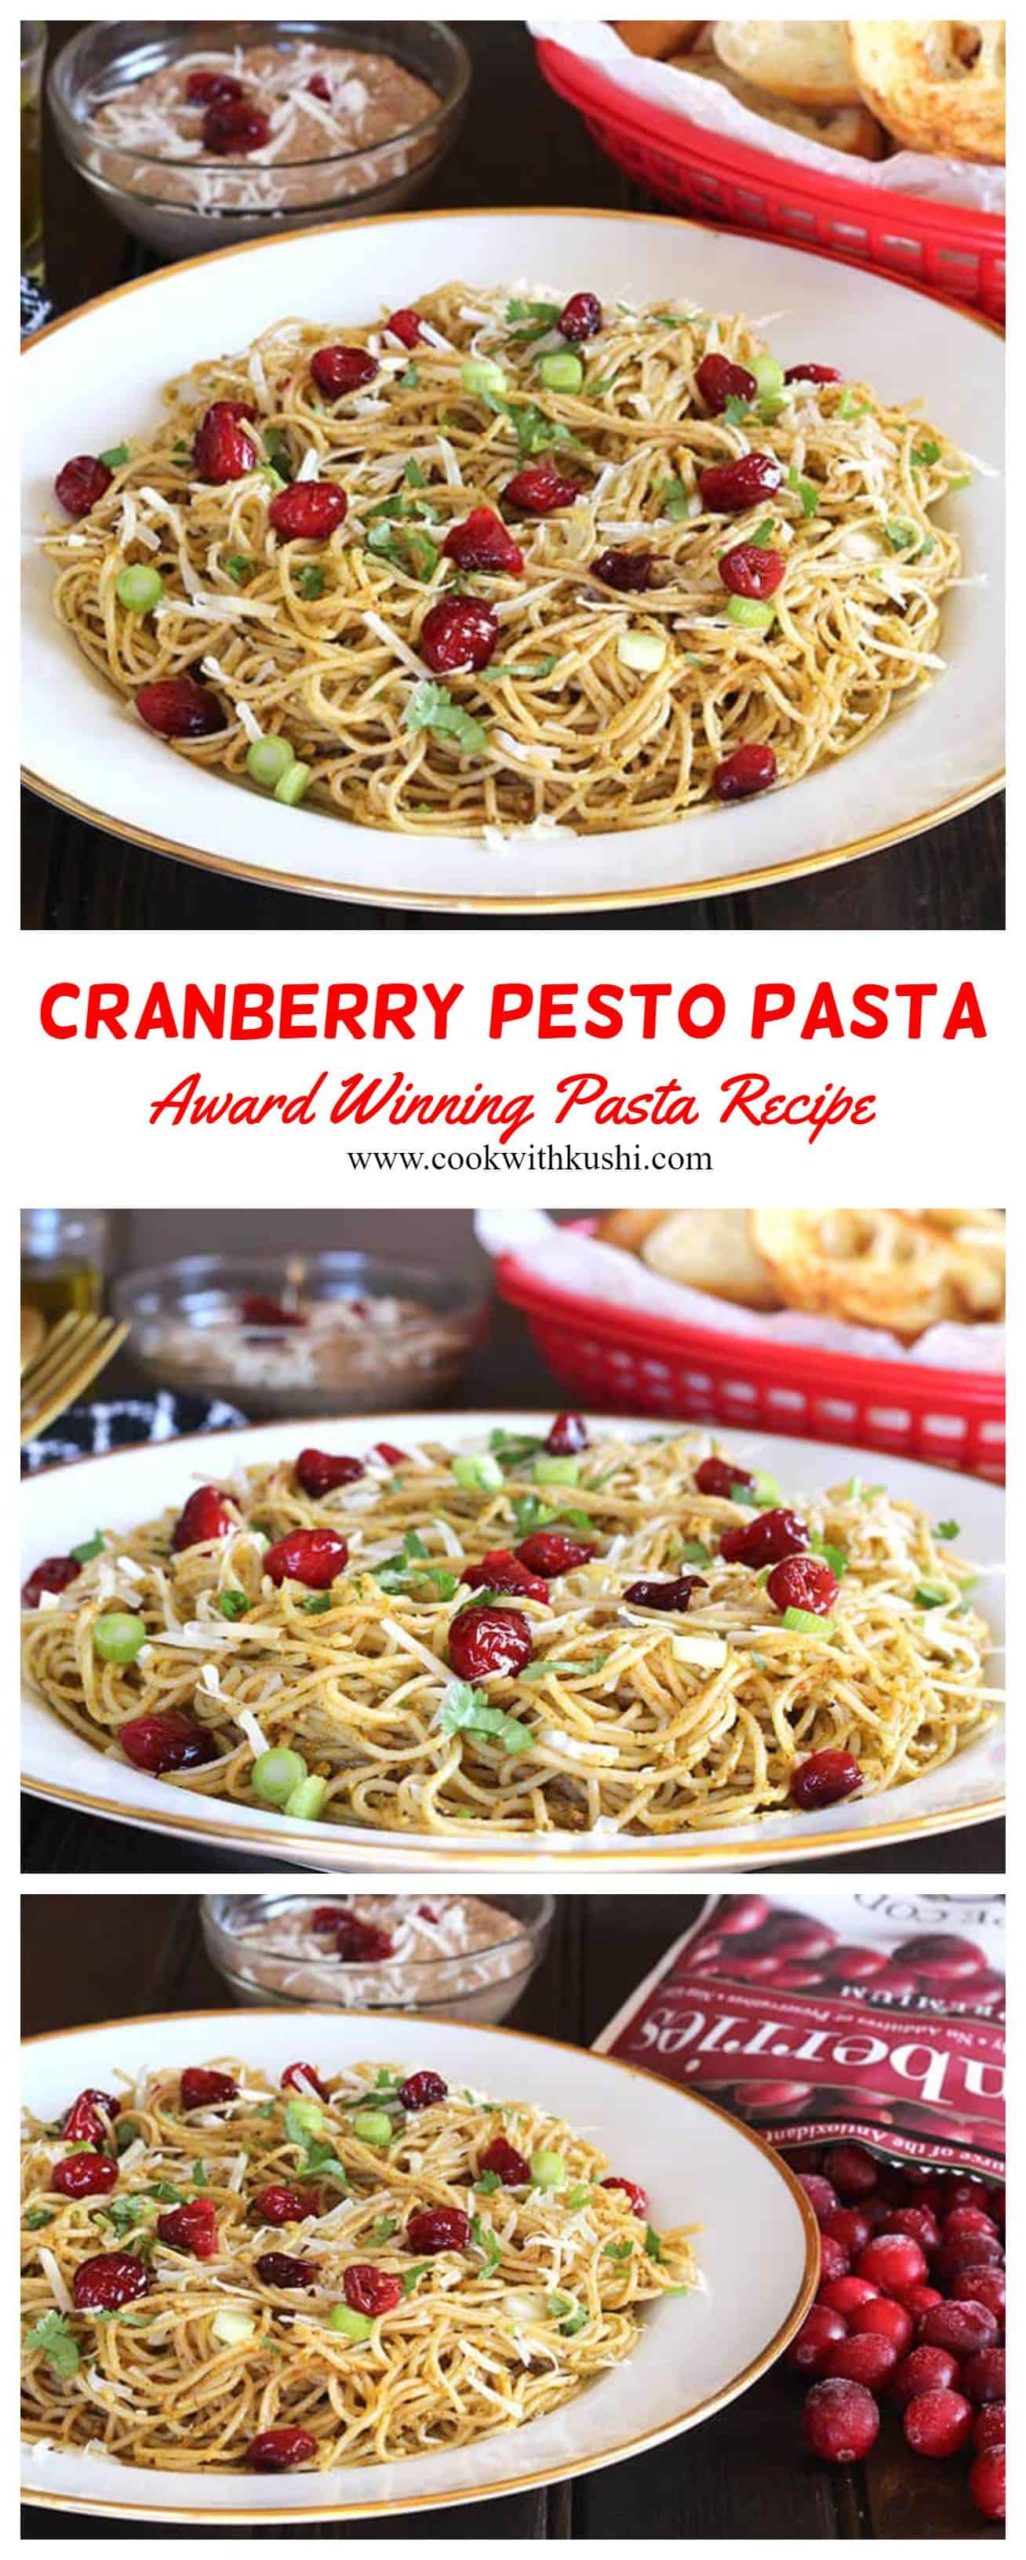 Cranberry Pesto Pasta is easy to make, rich and irresistibly delicious, flavorful pasta dish prepared using fresh homemade pesto and pasta of your choice in less than 30 minutes. This is one of the best and unique  cranberry recipe you should try for Thanksgiving or Christmas dinner. #cranberries #frozencranberryrecipes #thanksgivingcranberry #christmasdinner